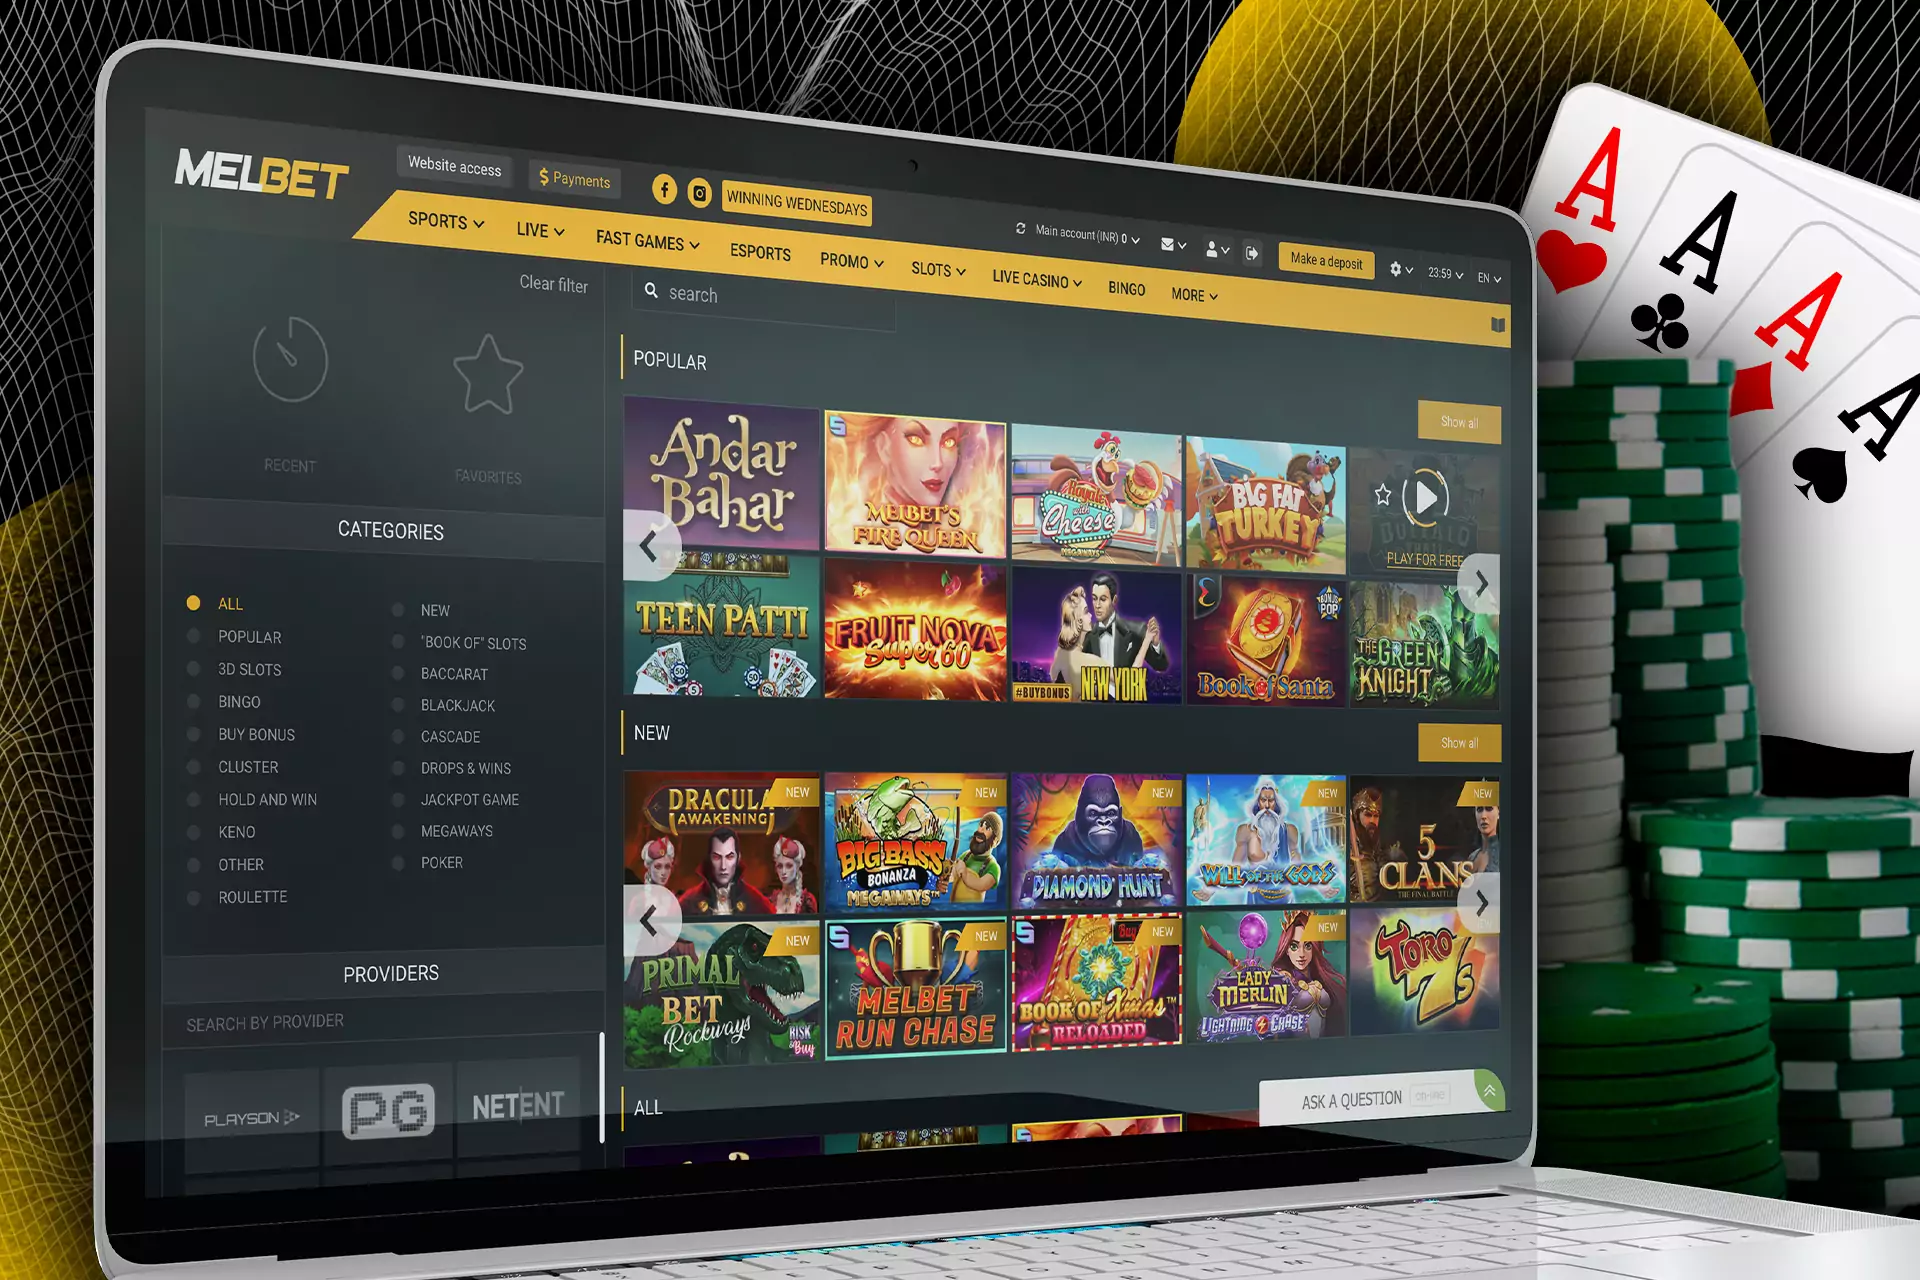 On Melbet, you can play any type of game from classic Roulette to traditional Andar Bahar.